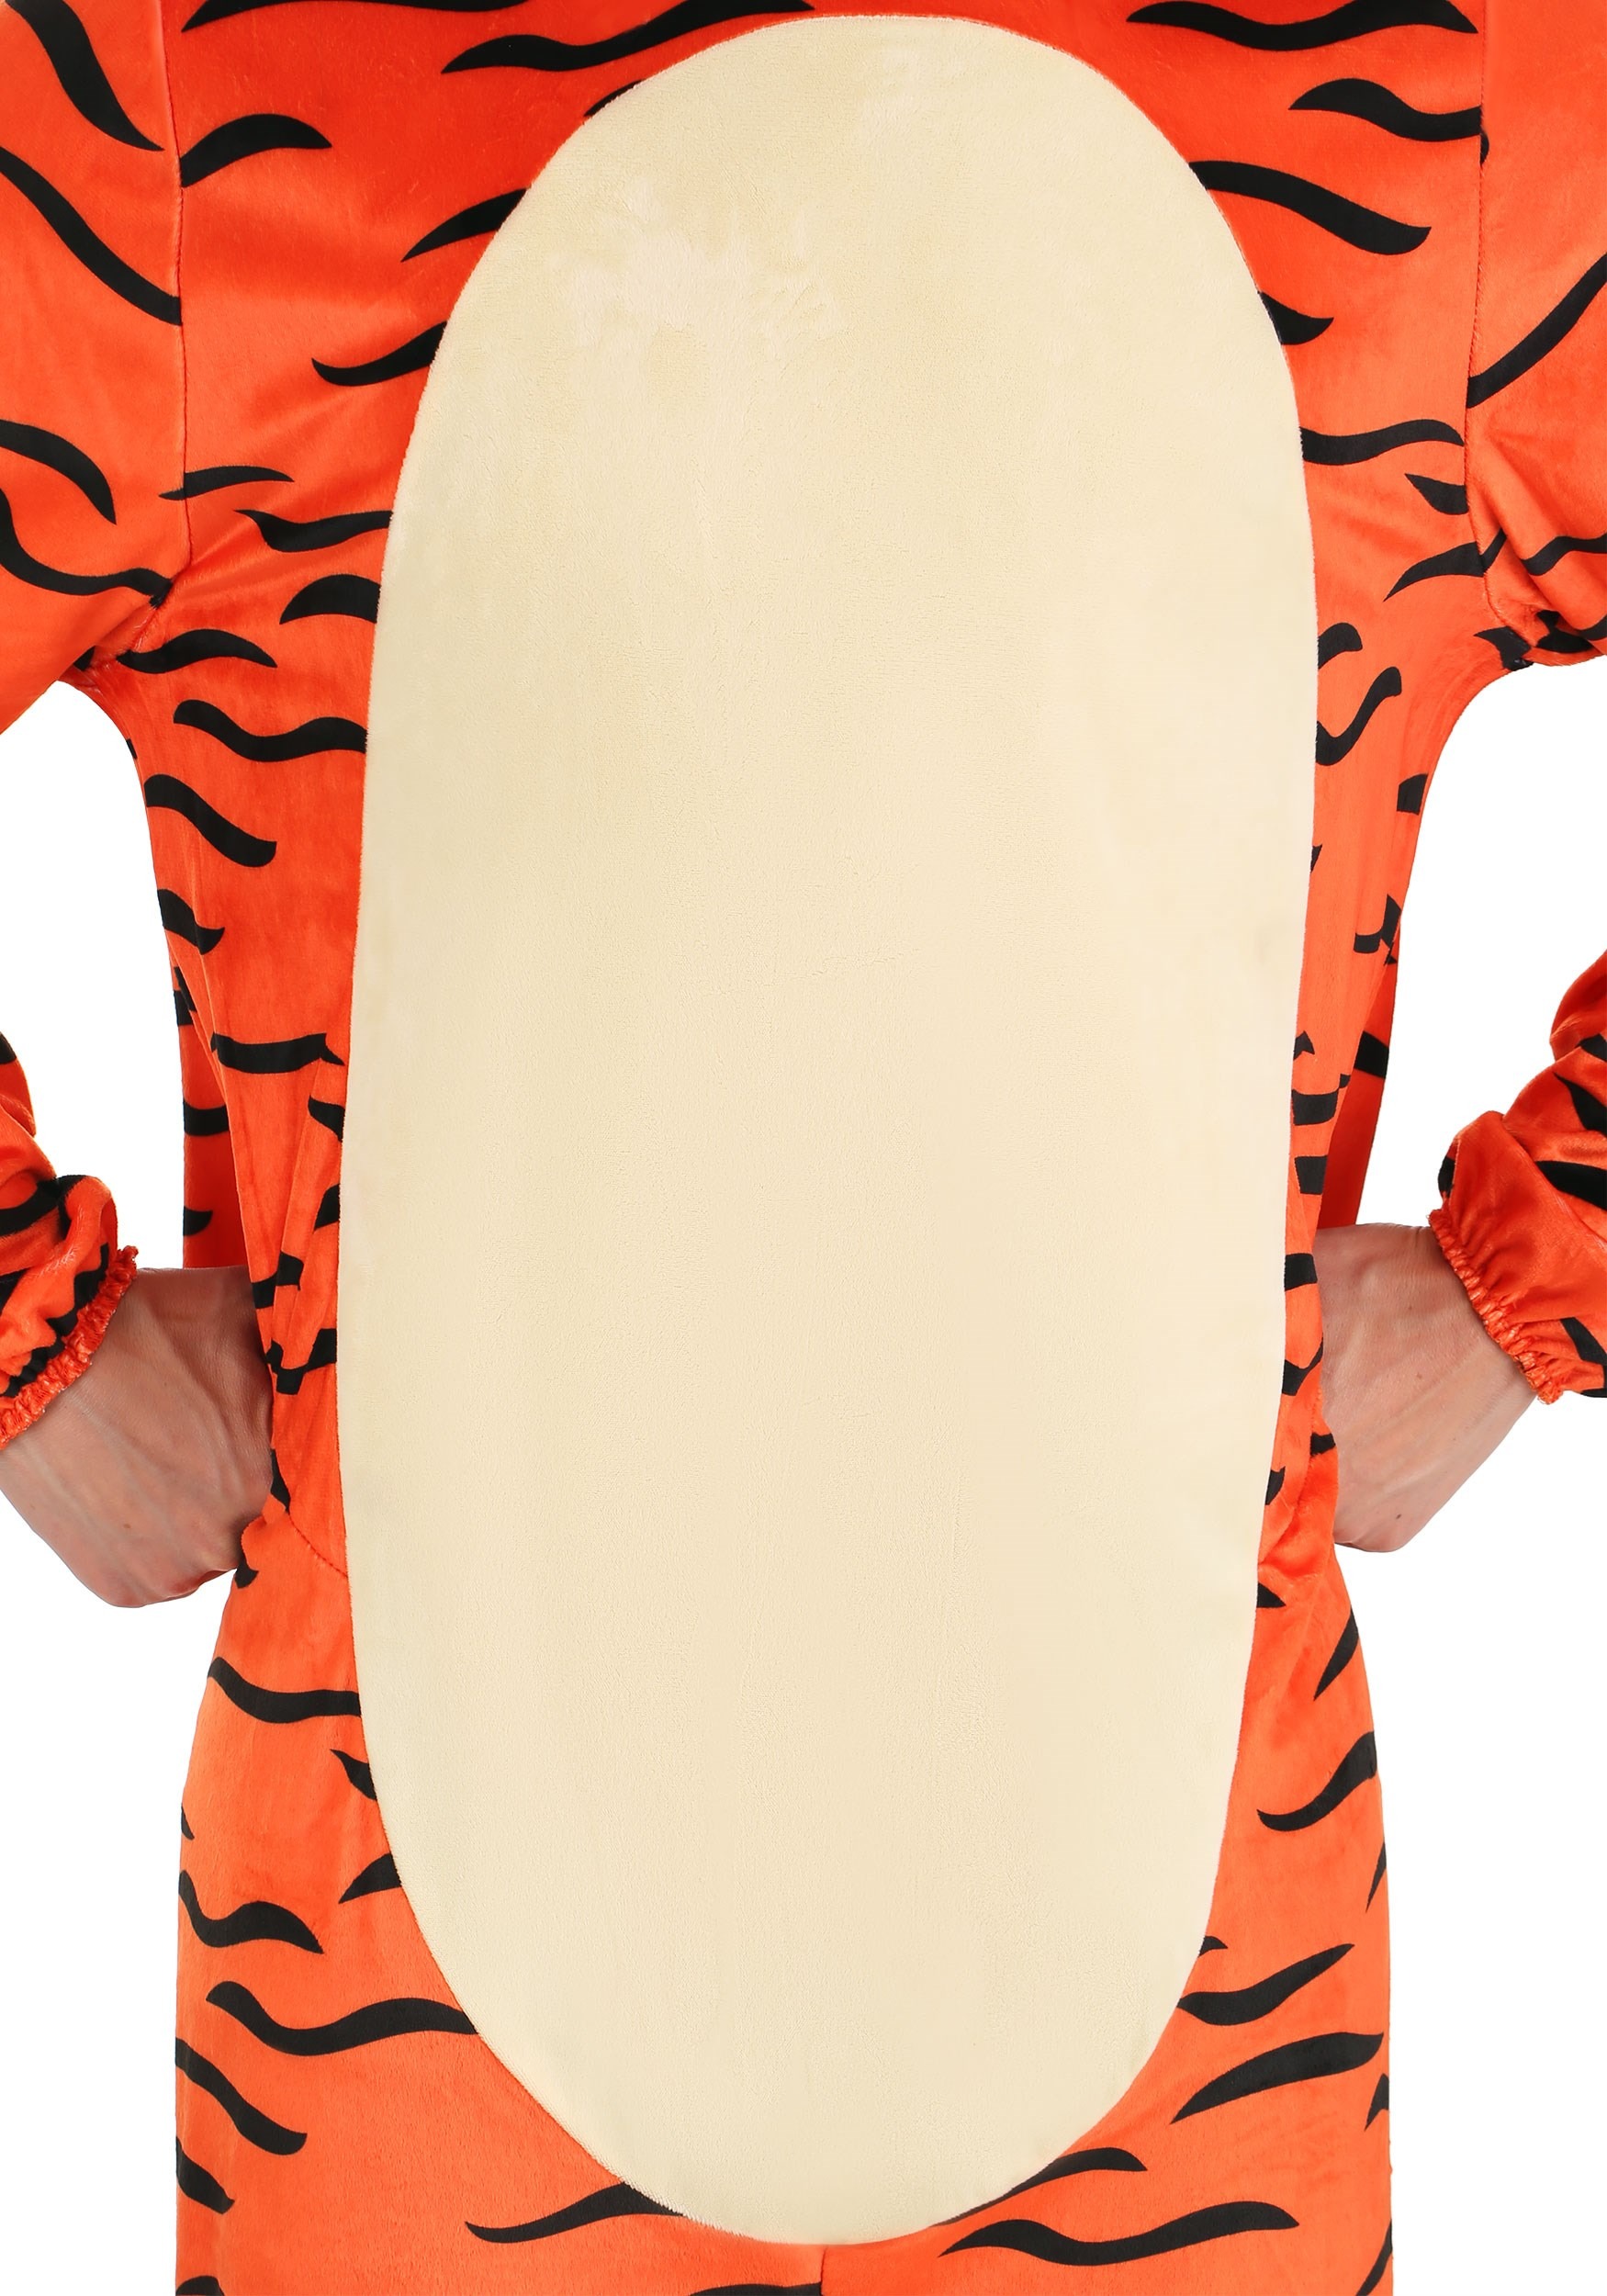 Deluxe Tigger Fancy Dress Costume For Adults